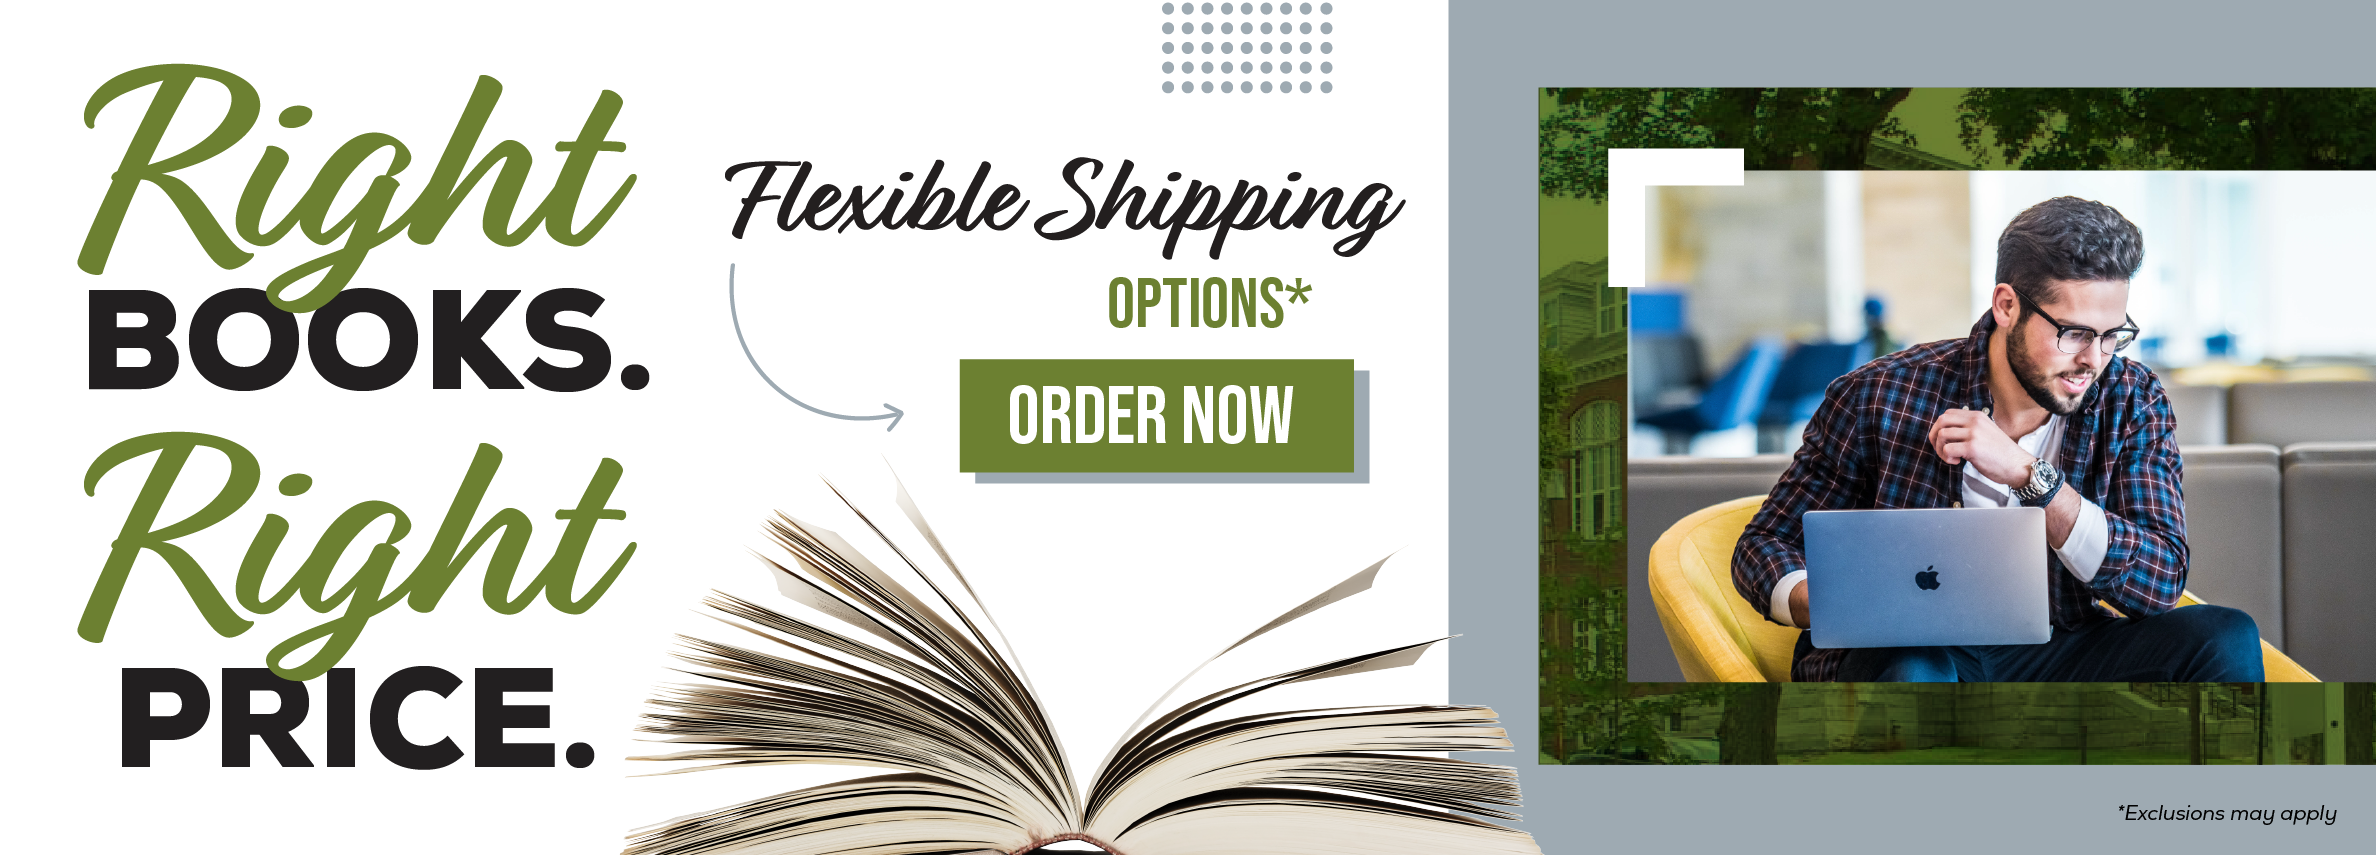 Right books. Right price. Flexible shipping options.* Order now. *Exclusions may apply.